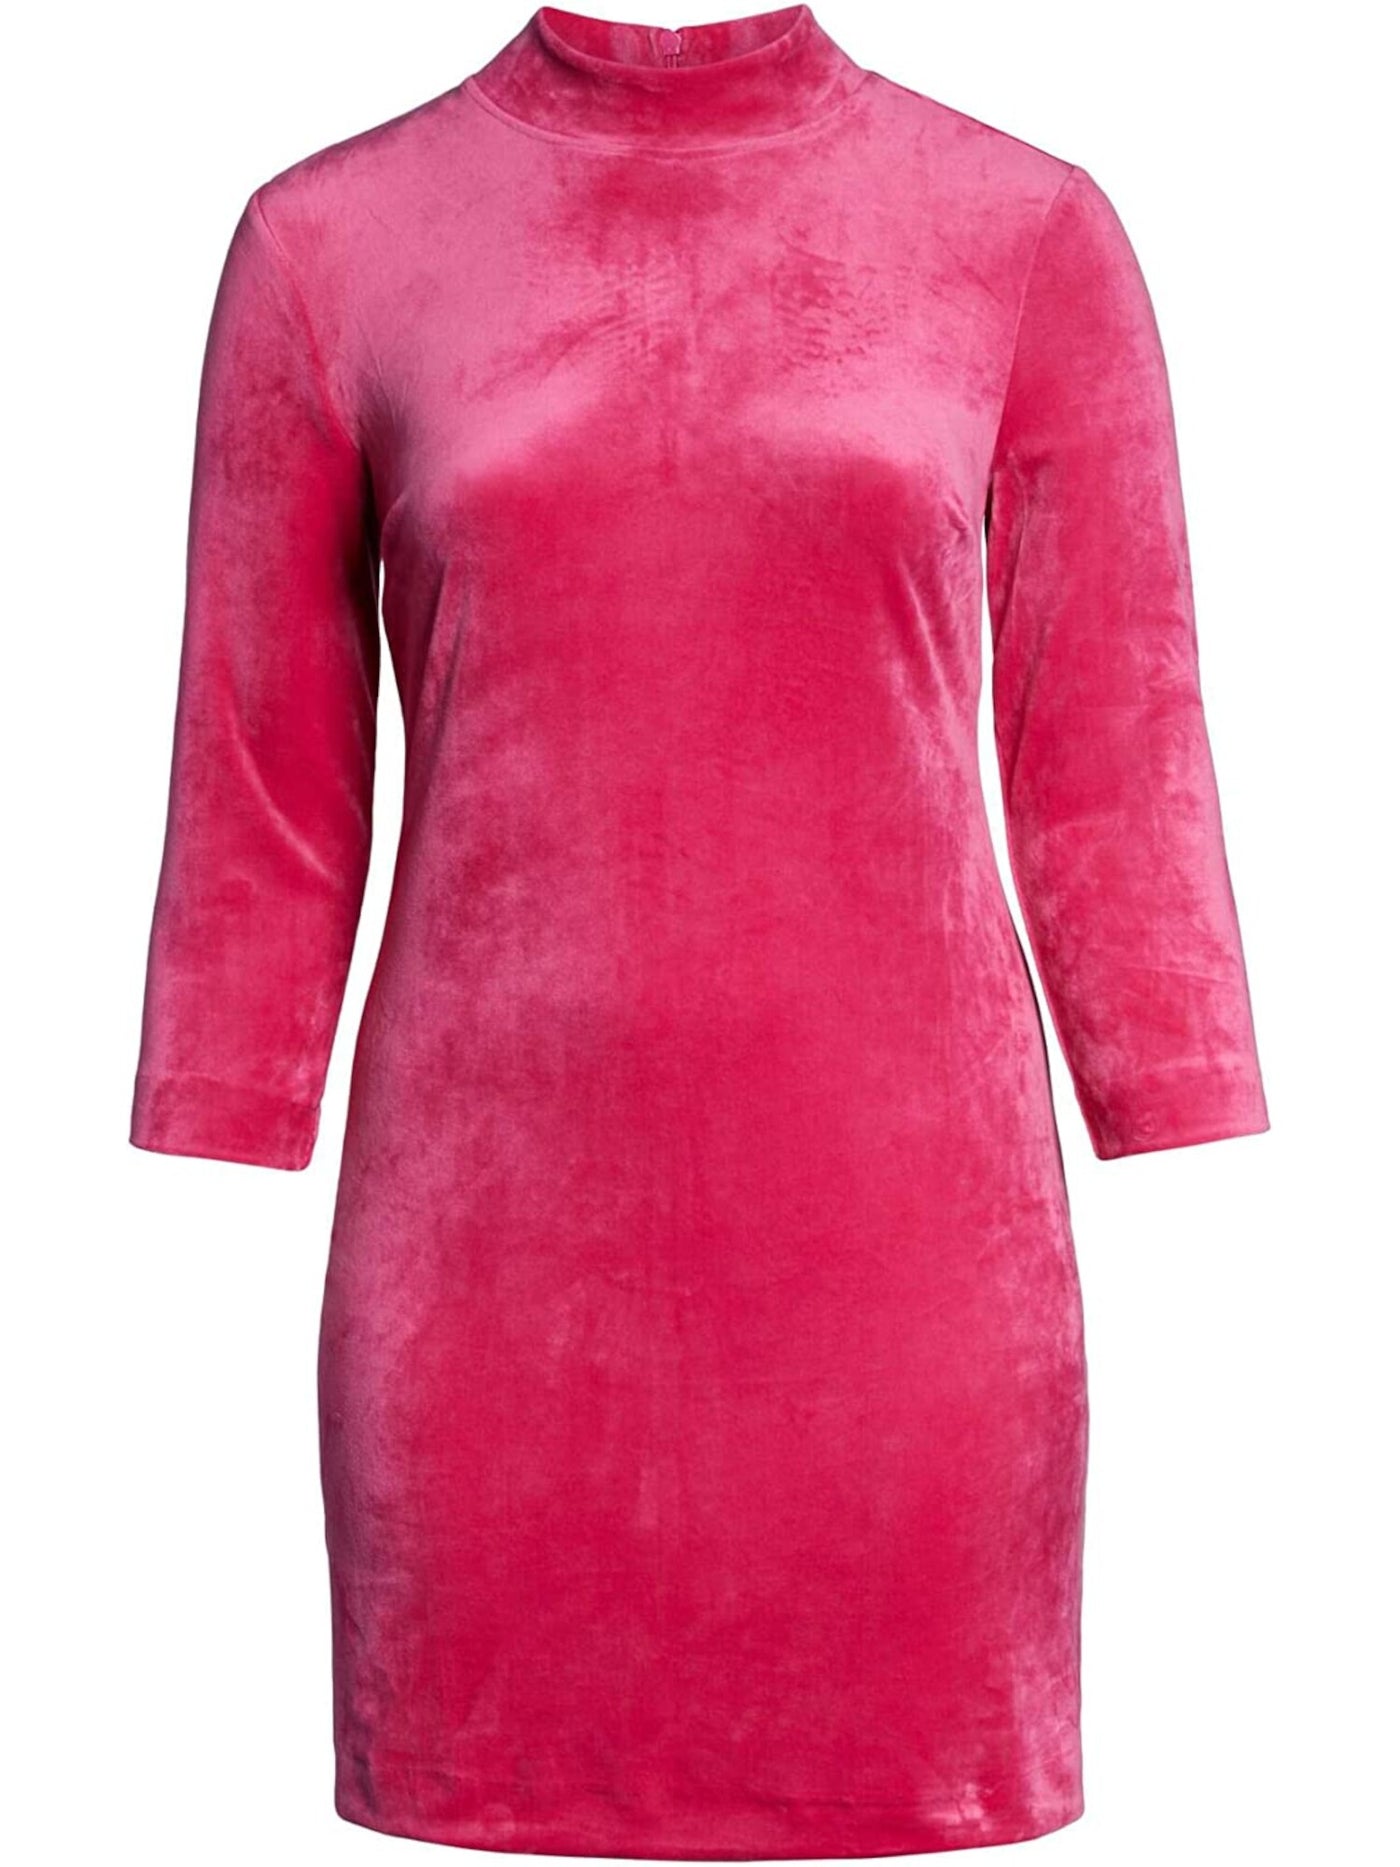 SANCTUARY Womens Pink Stretch Zippered Darted Velour 3/4 Sleeve Mock Neck Short Party Shift Dress Plus 1X